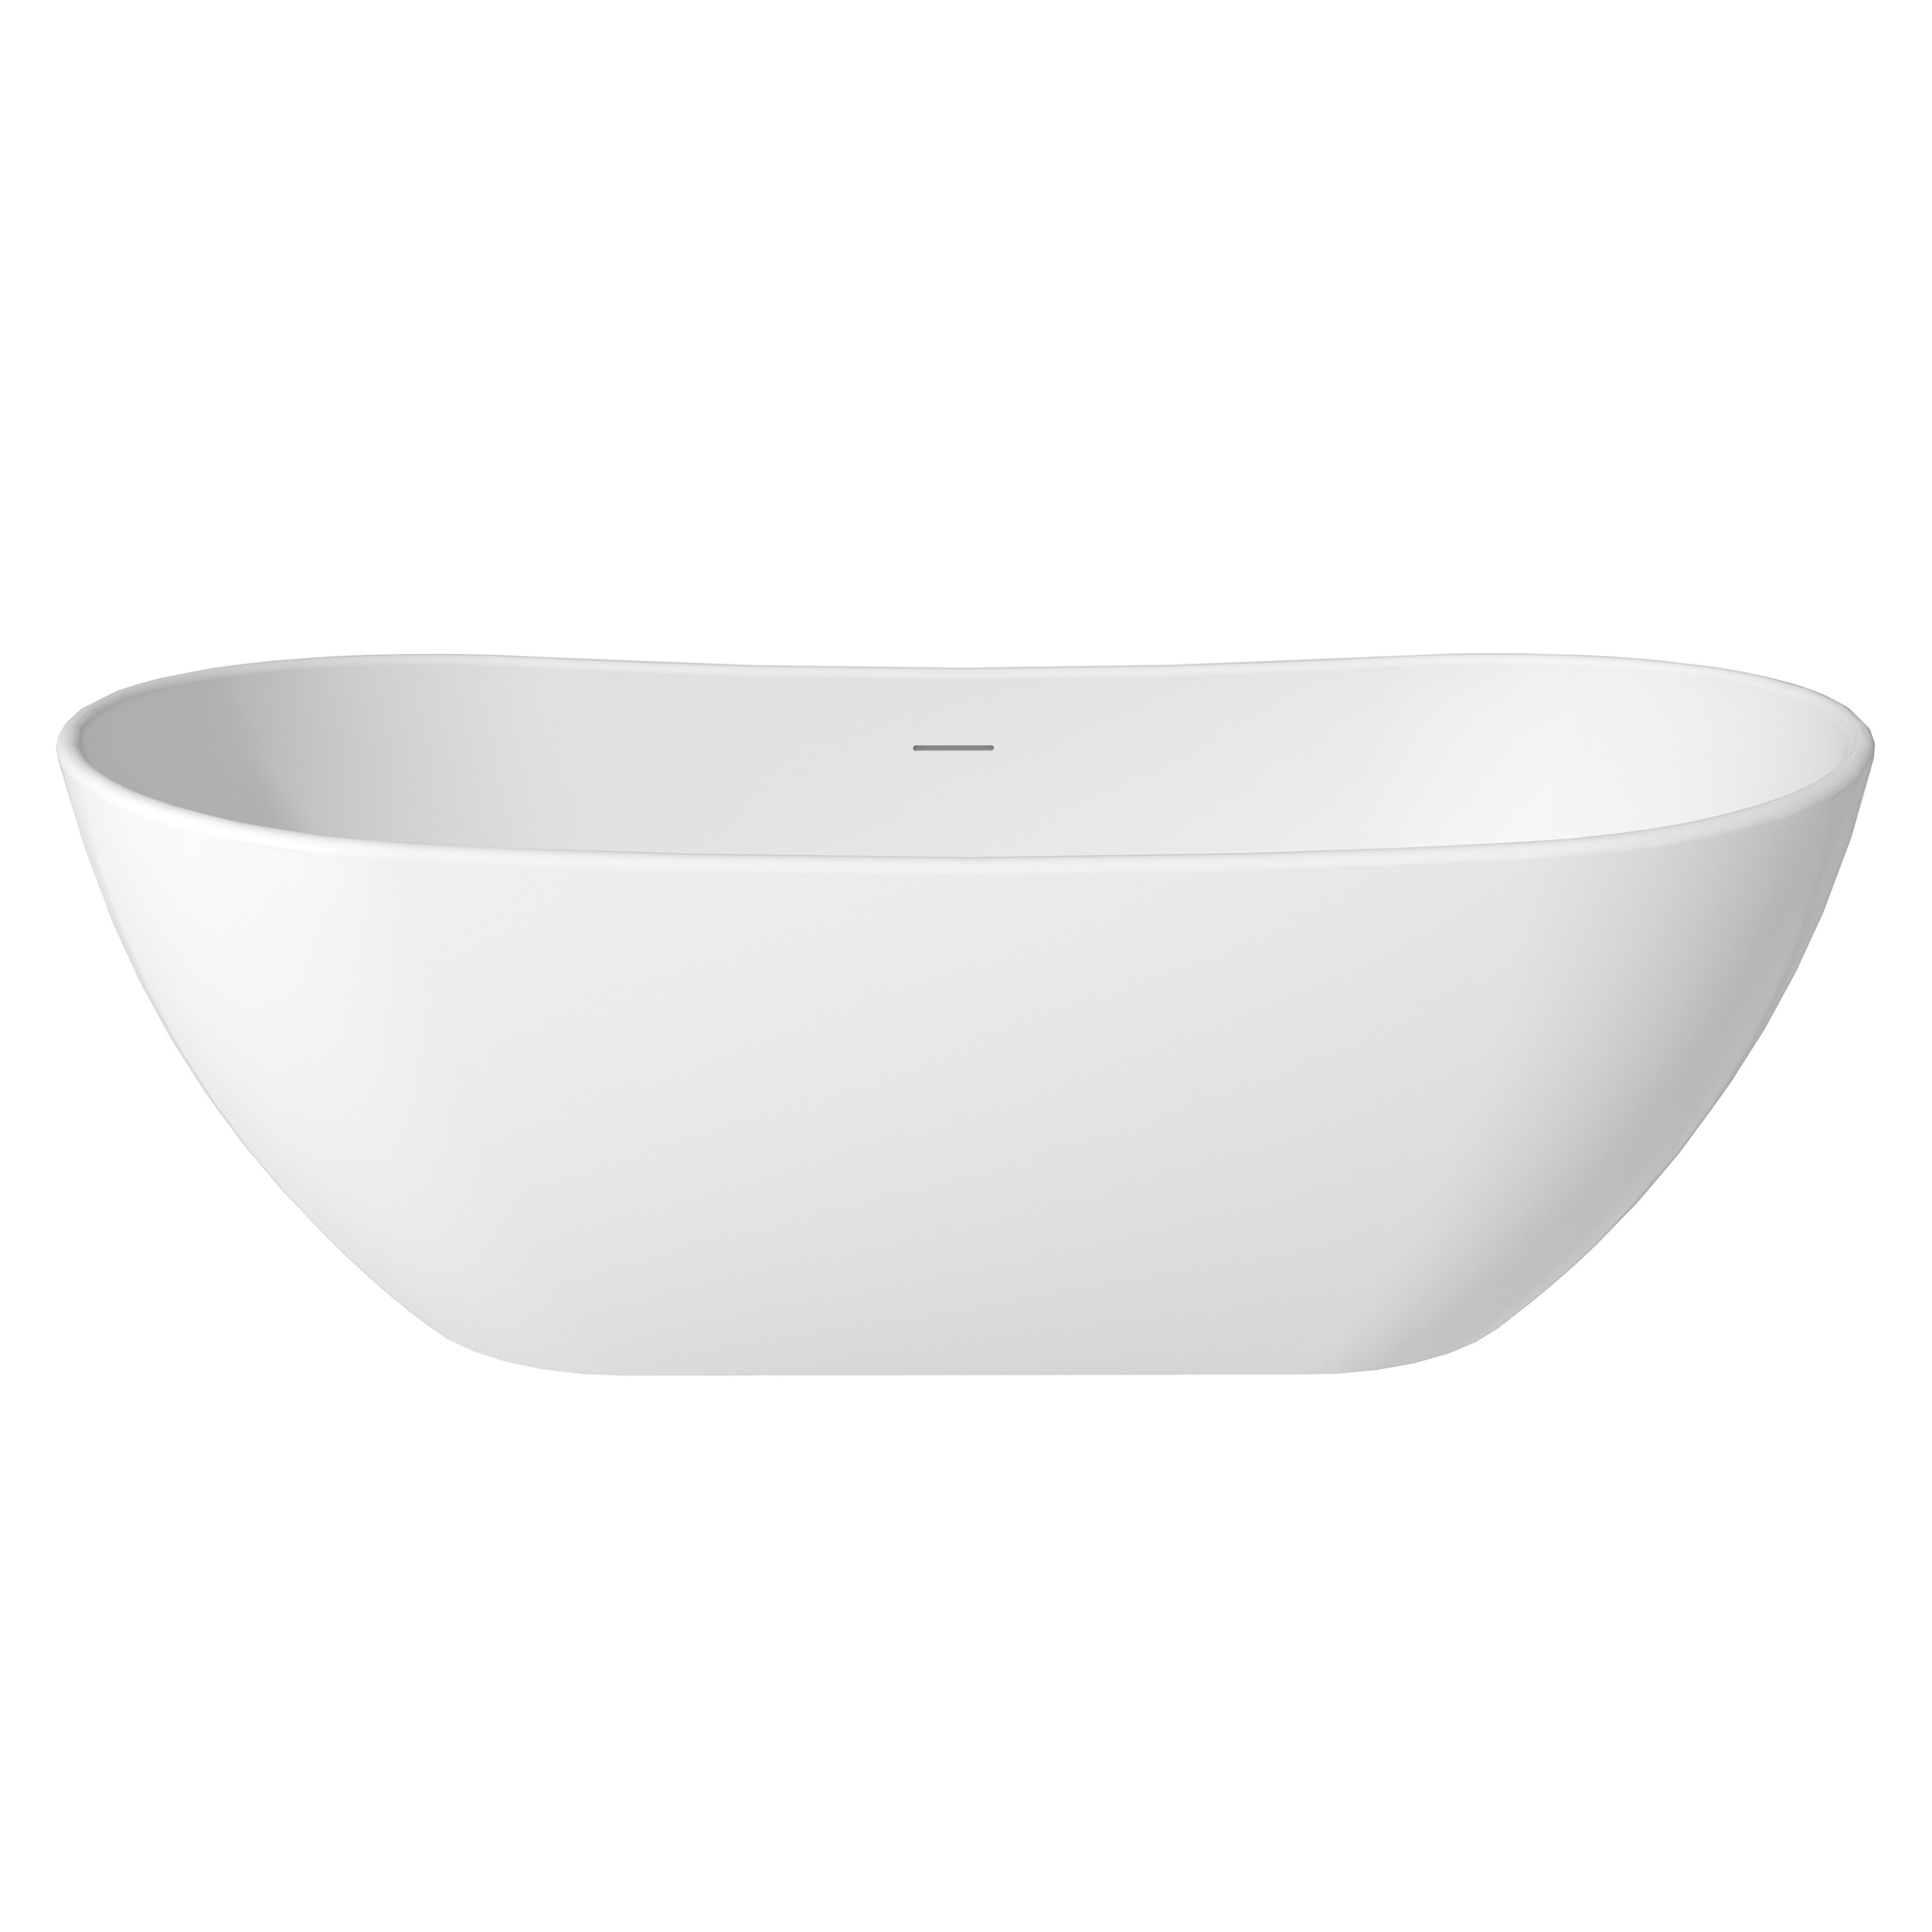 56"/65"/71" Solid Surface Stone Freestanding Tub - Soak in Style with Matte White Finish, Center Drain, and cUPc Certification(With/without Bathtub Faucet)